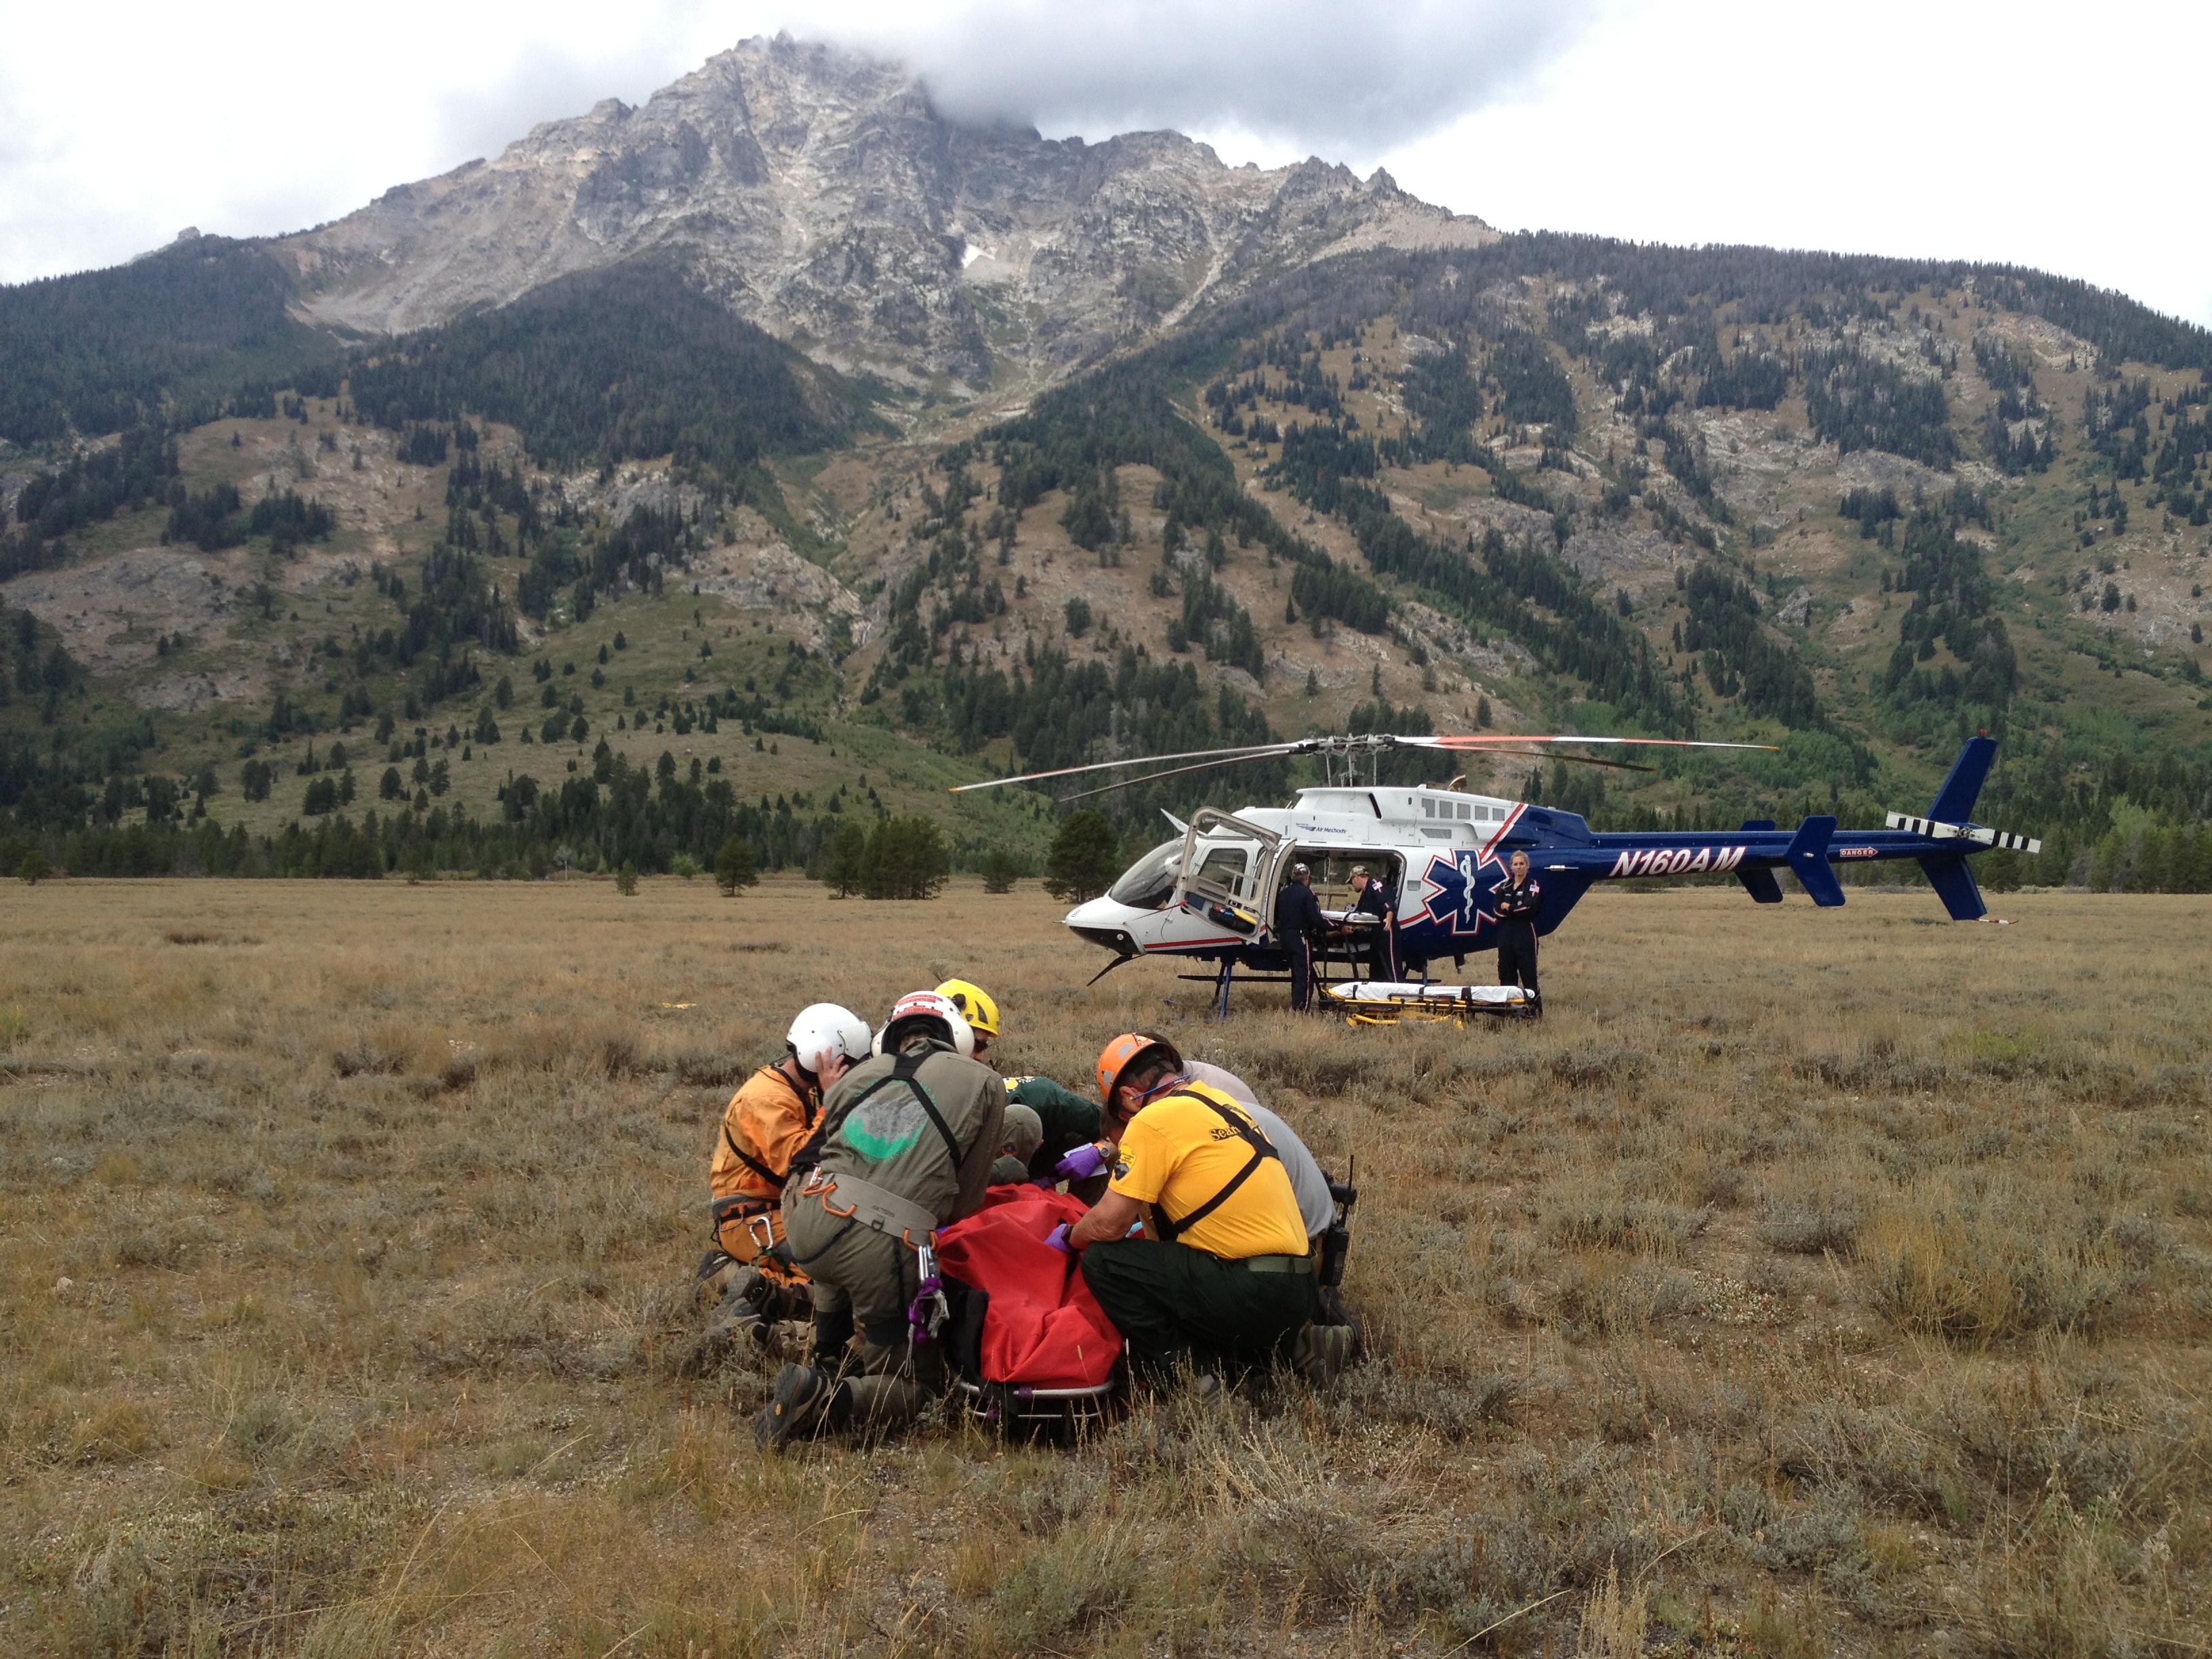 Park Rangers attend to White before loading him into a lifeflight helicopter